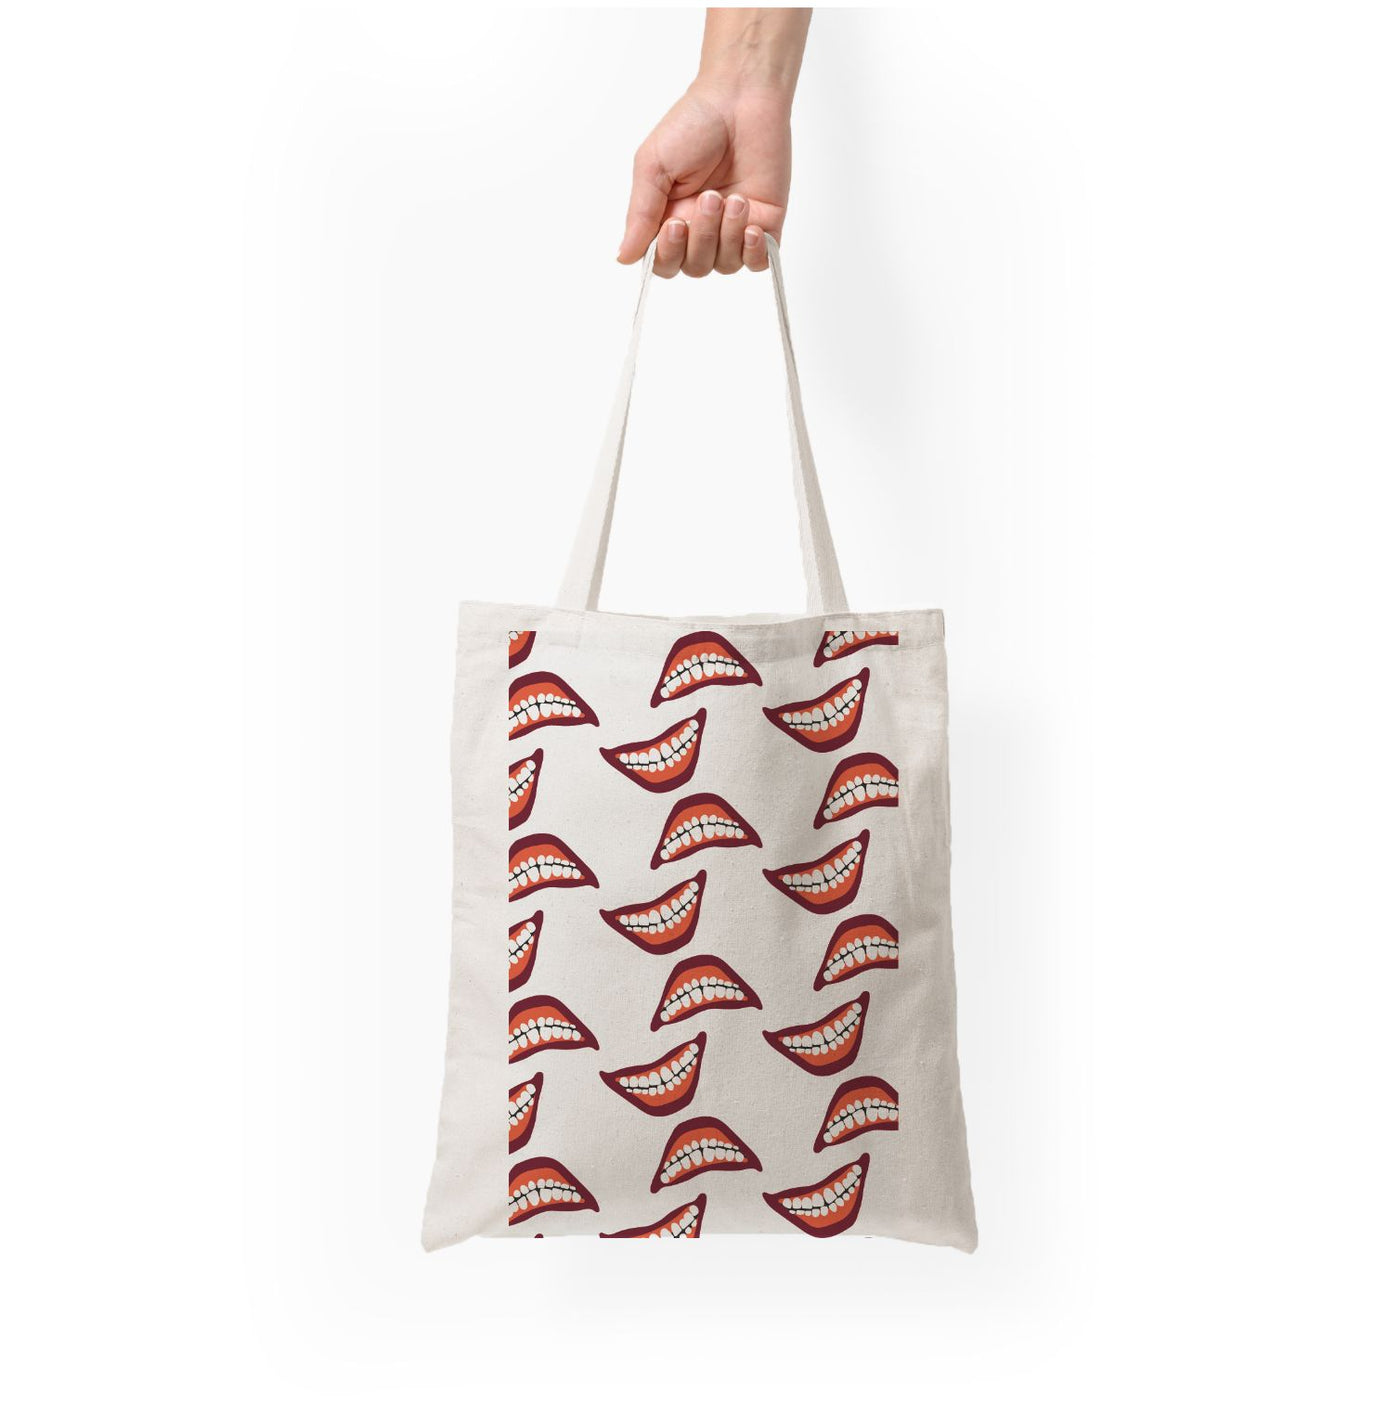 Mouth Pattern - American Horror Story Tote Bag